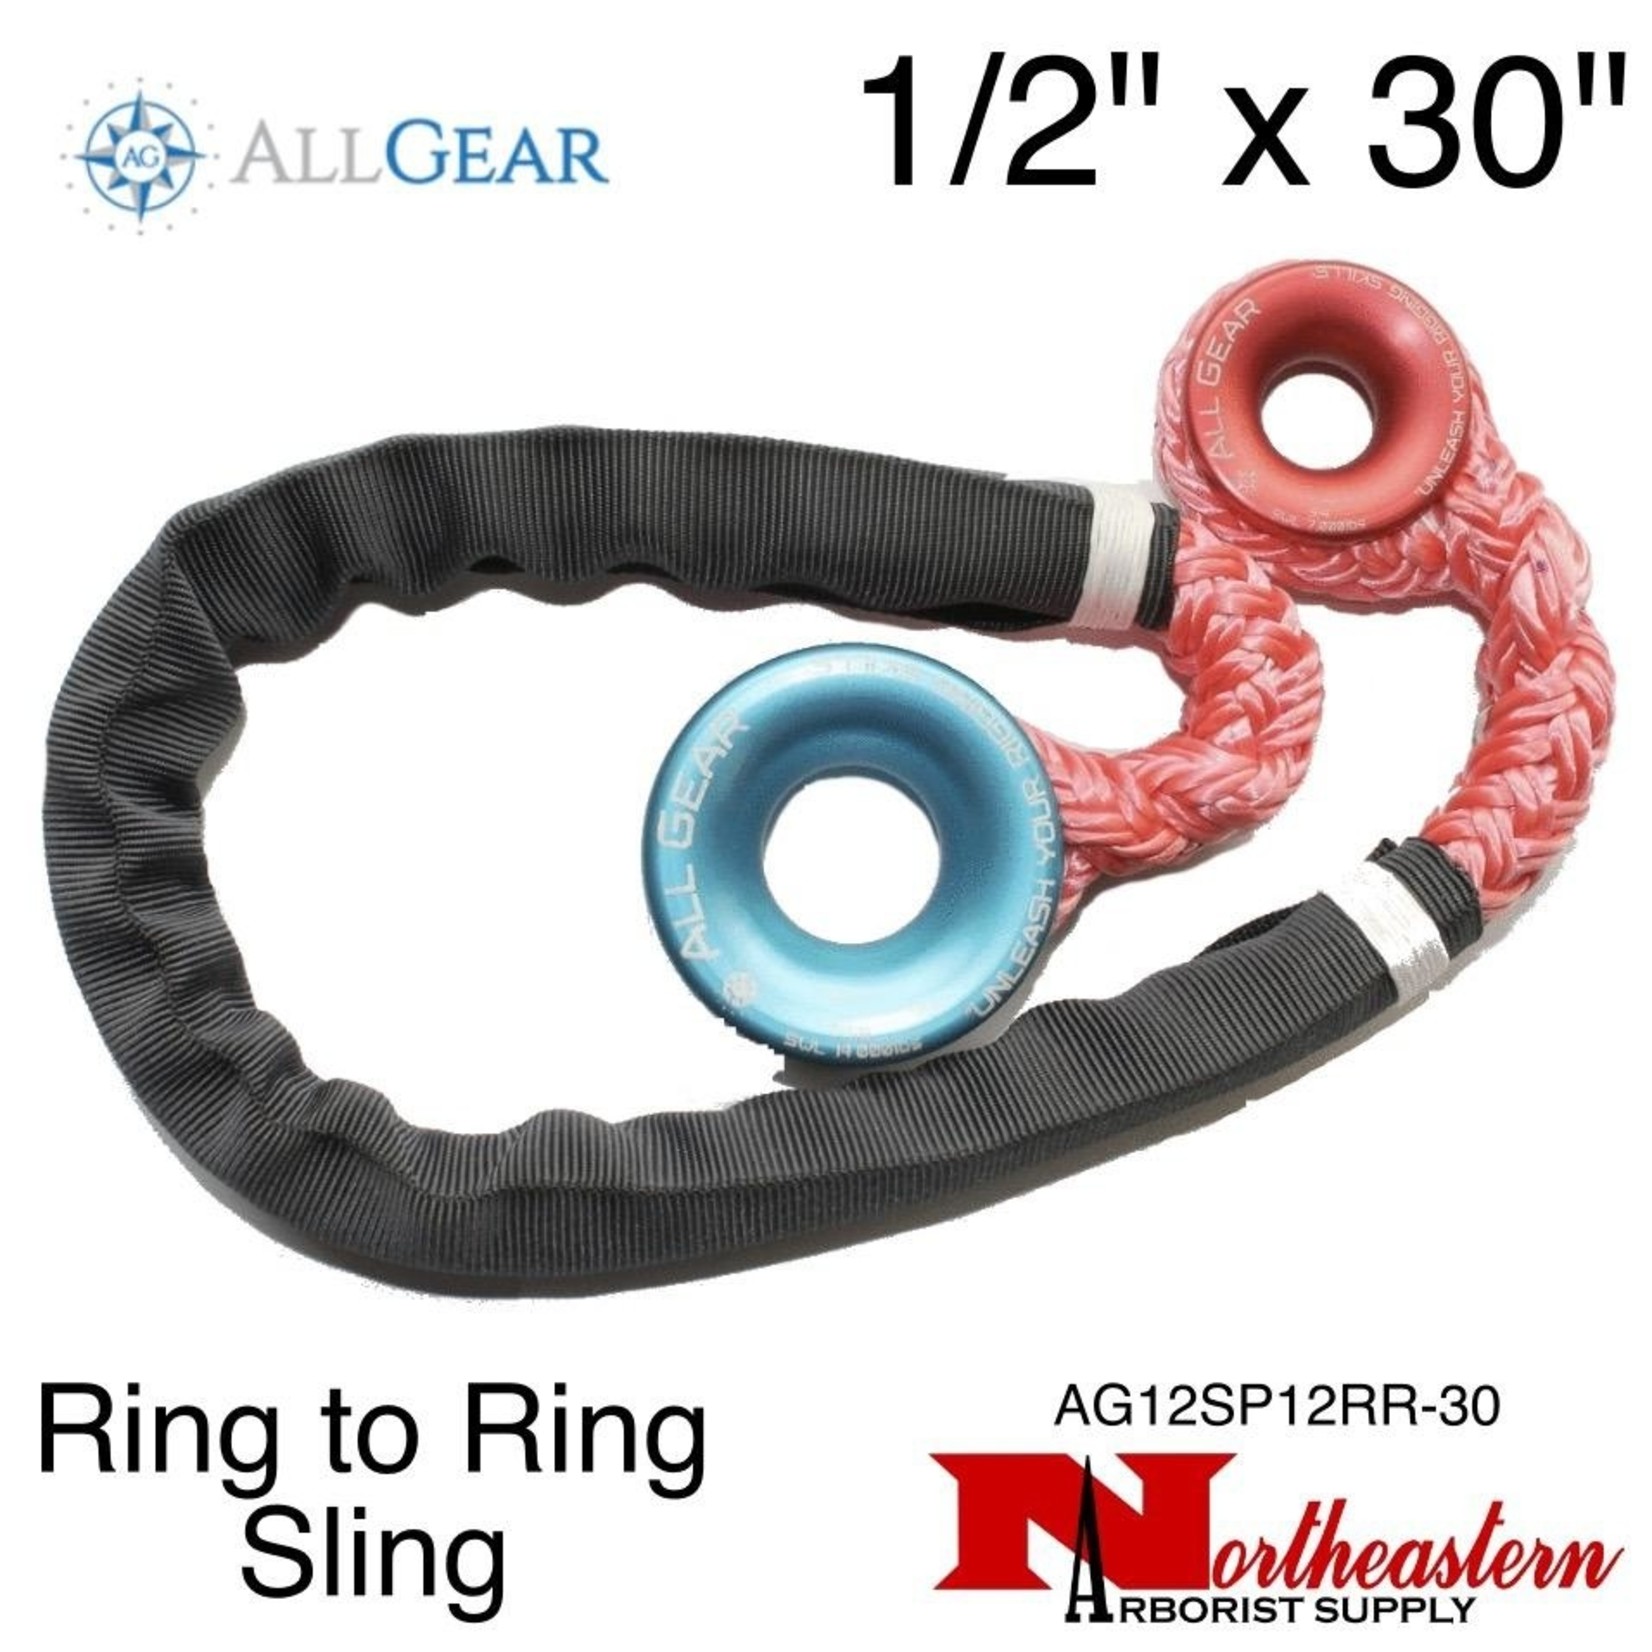 All Gear Inc. Ring To Ring Sling 1/2" x 30" 11,000 Lbs ABS